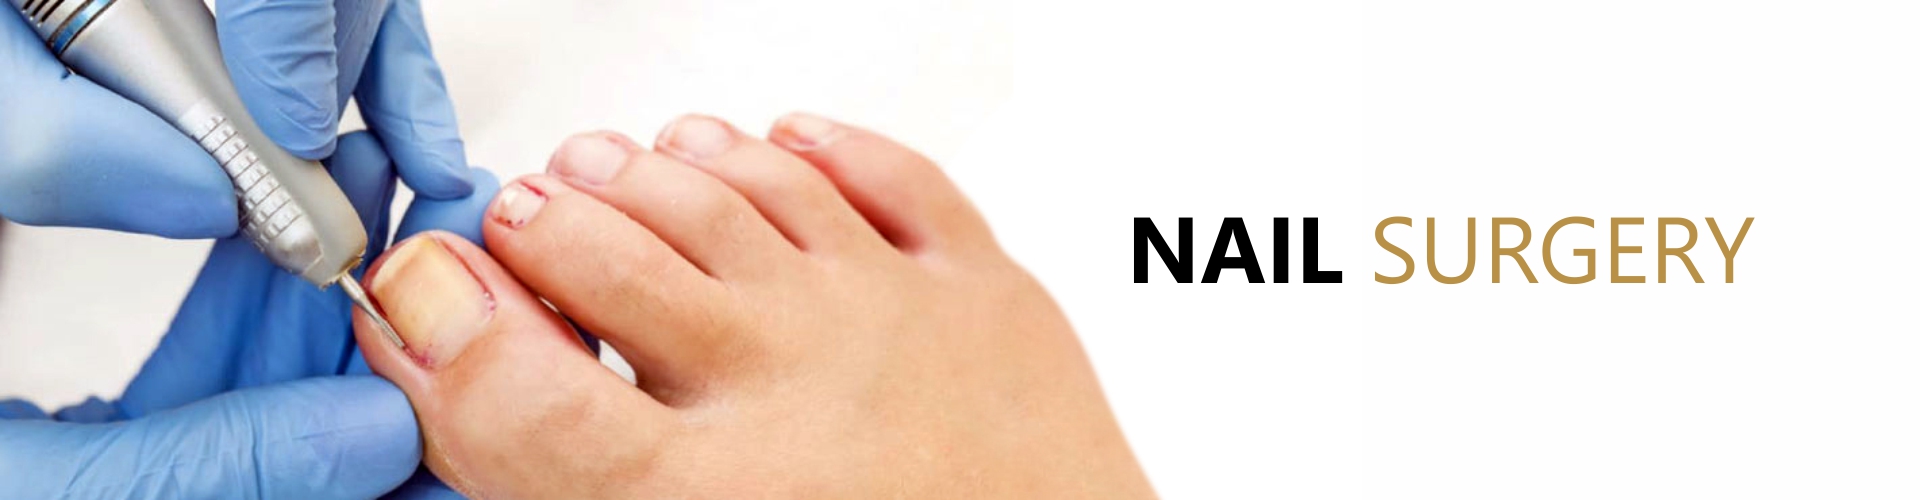 Nail Surgery | The Chelsea Clinic Chiropodists Podiatrists